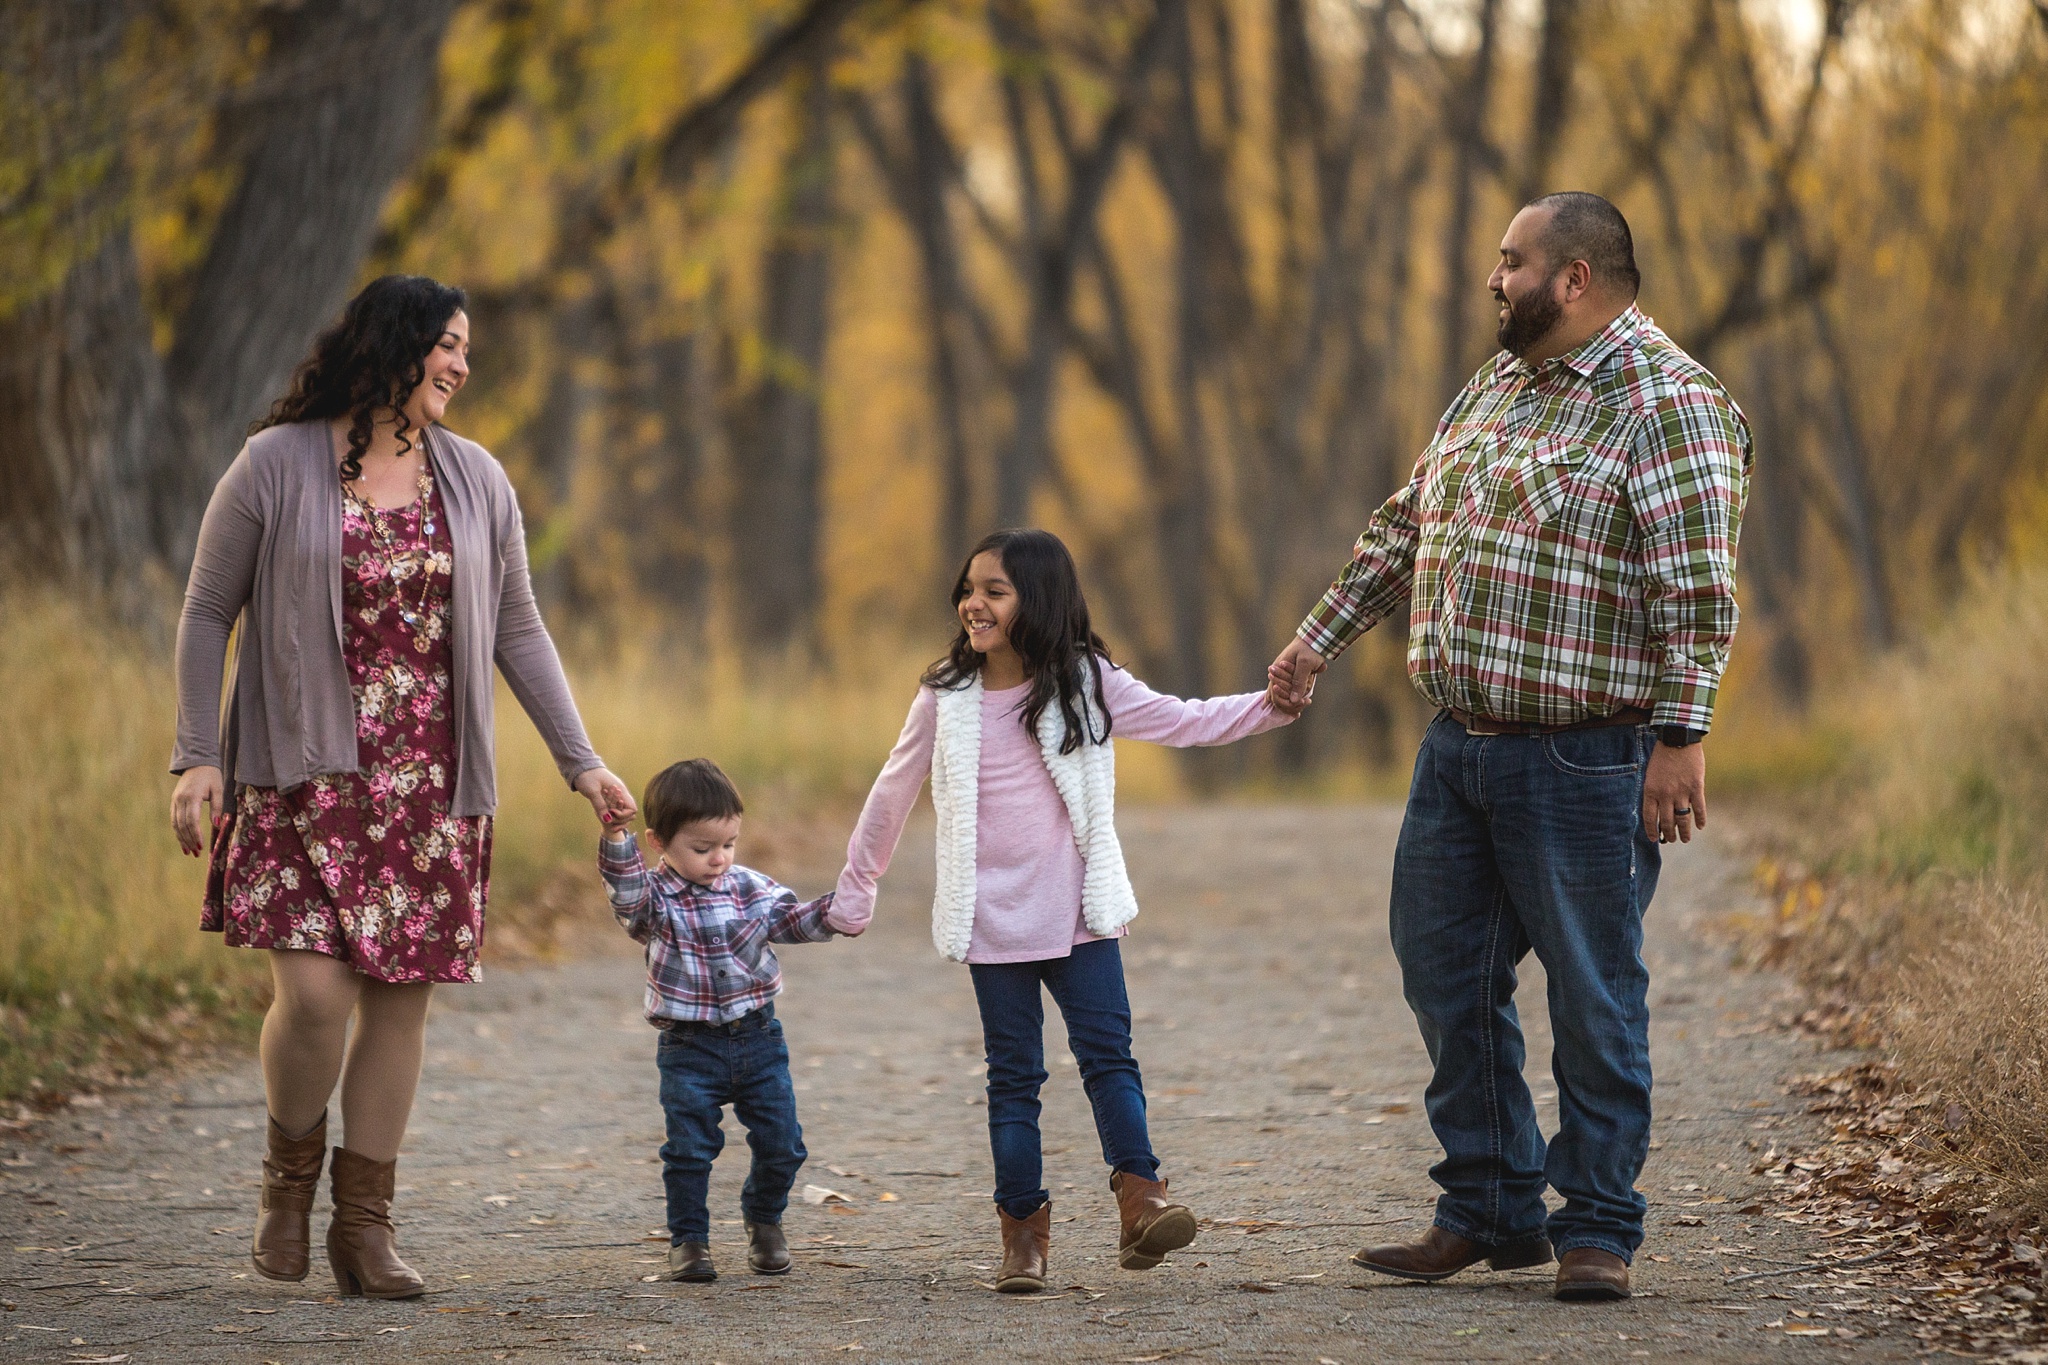 Cute family walking during fall family portraits. The Aguayo Family’s Fall Family Photo Session at Golden Ponds Nature Area by Colorado Family Photographer, Jennifer Garza. Golden Ponds Nature Area Family Photographer, Golden Ponds Nature Area, Golden Ponds, Golden Ponds Family Photographer, Longmont Family Photography, Longmont Family Photographer, Colorado Family Photos, Colorado Family Photographer, Colorado Fall Photos, Fall Photos